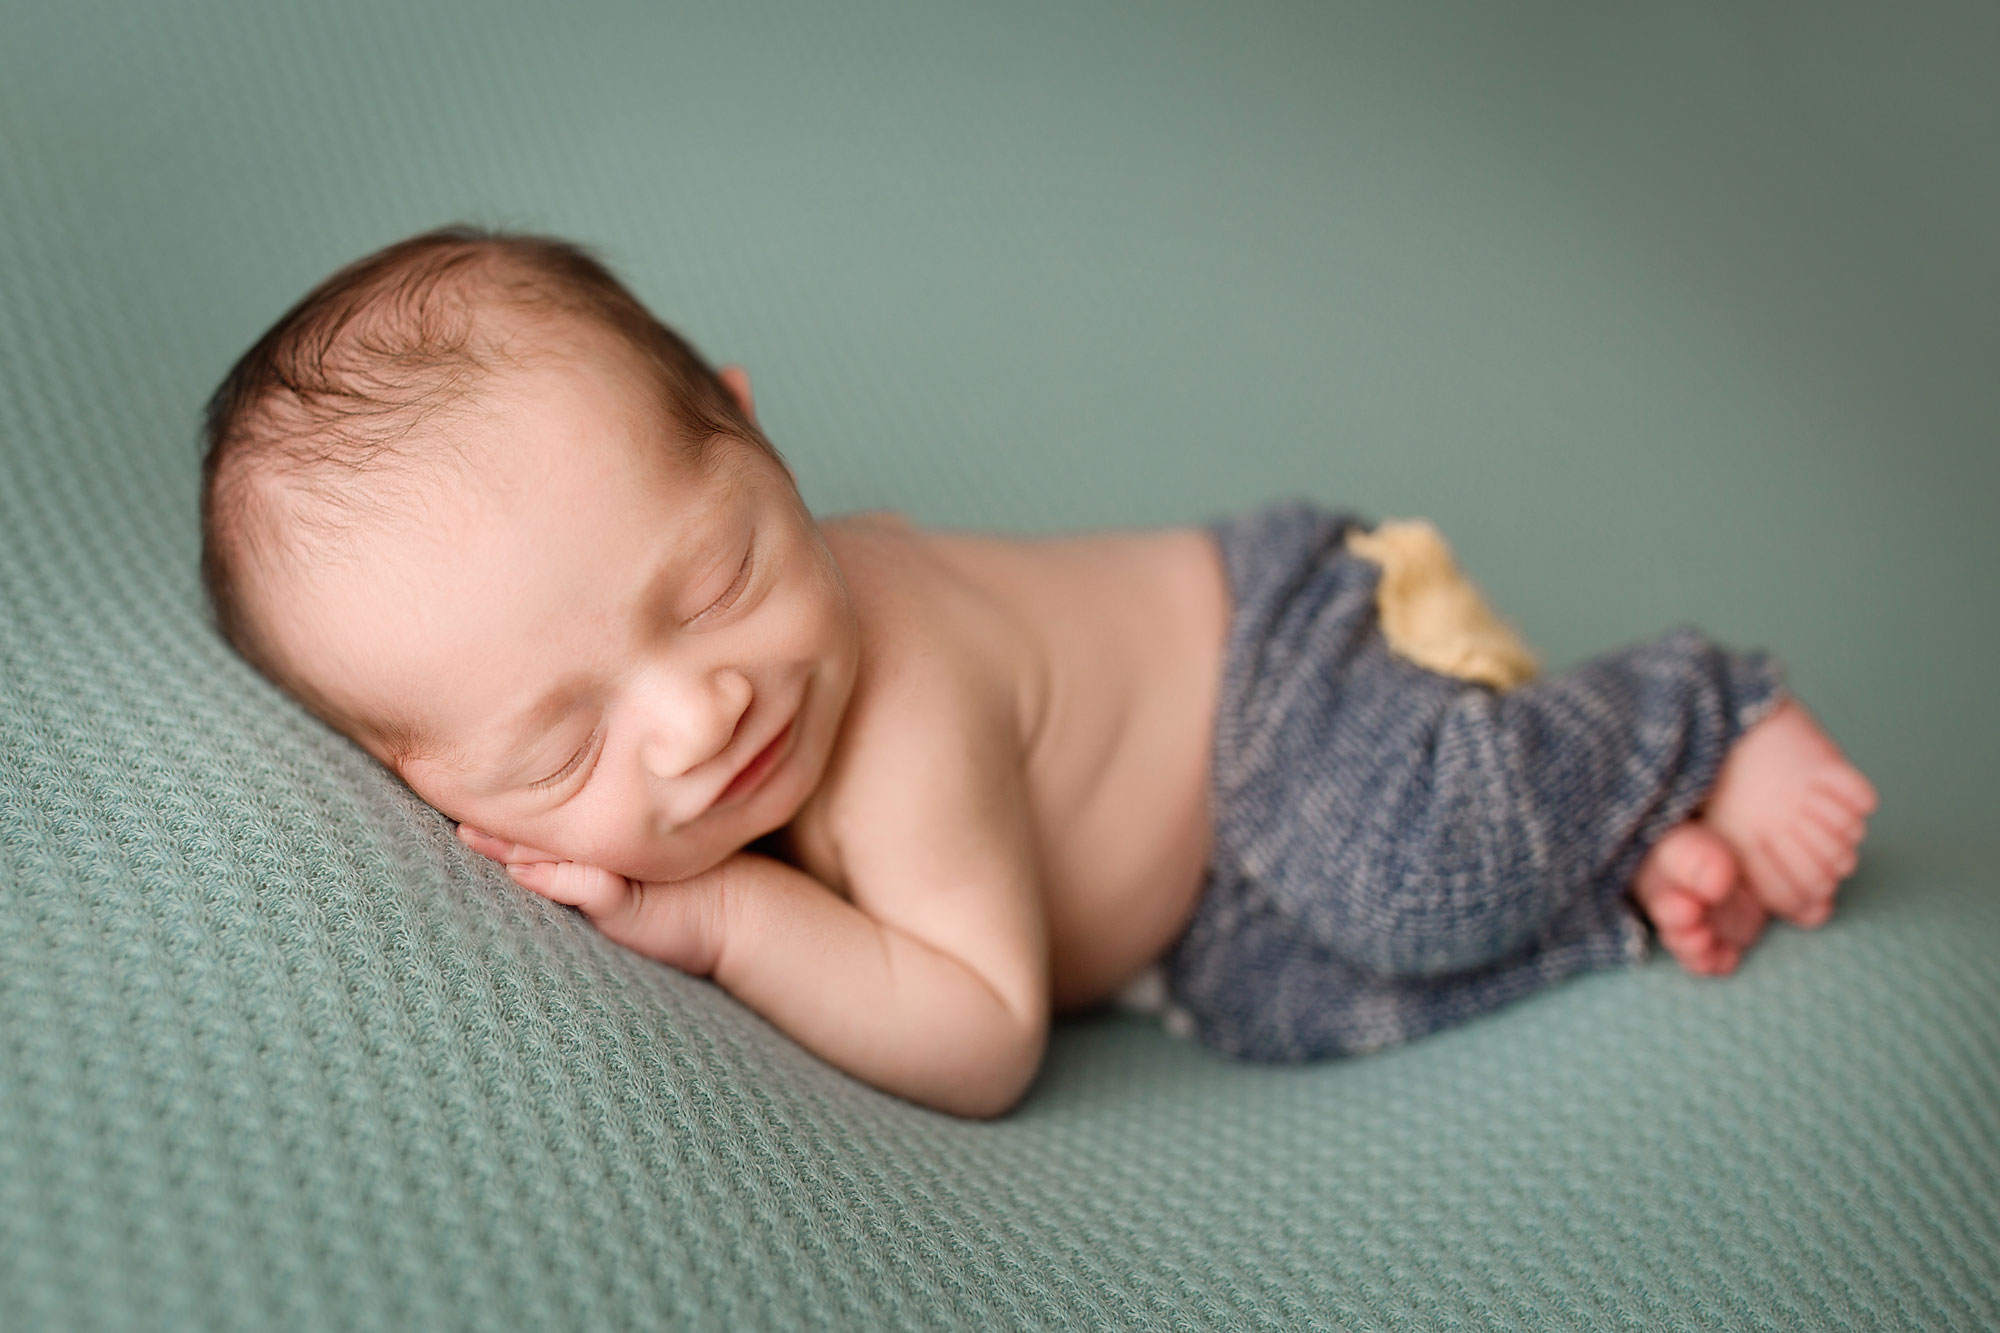 Branchburg NJ newborn pictures, smiling baby boy dressed in patched pants and asleep on teal background